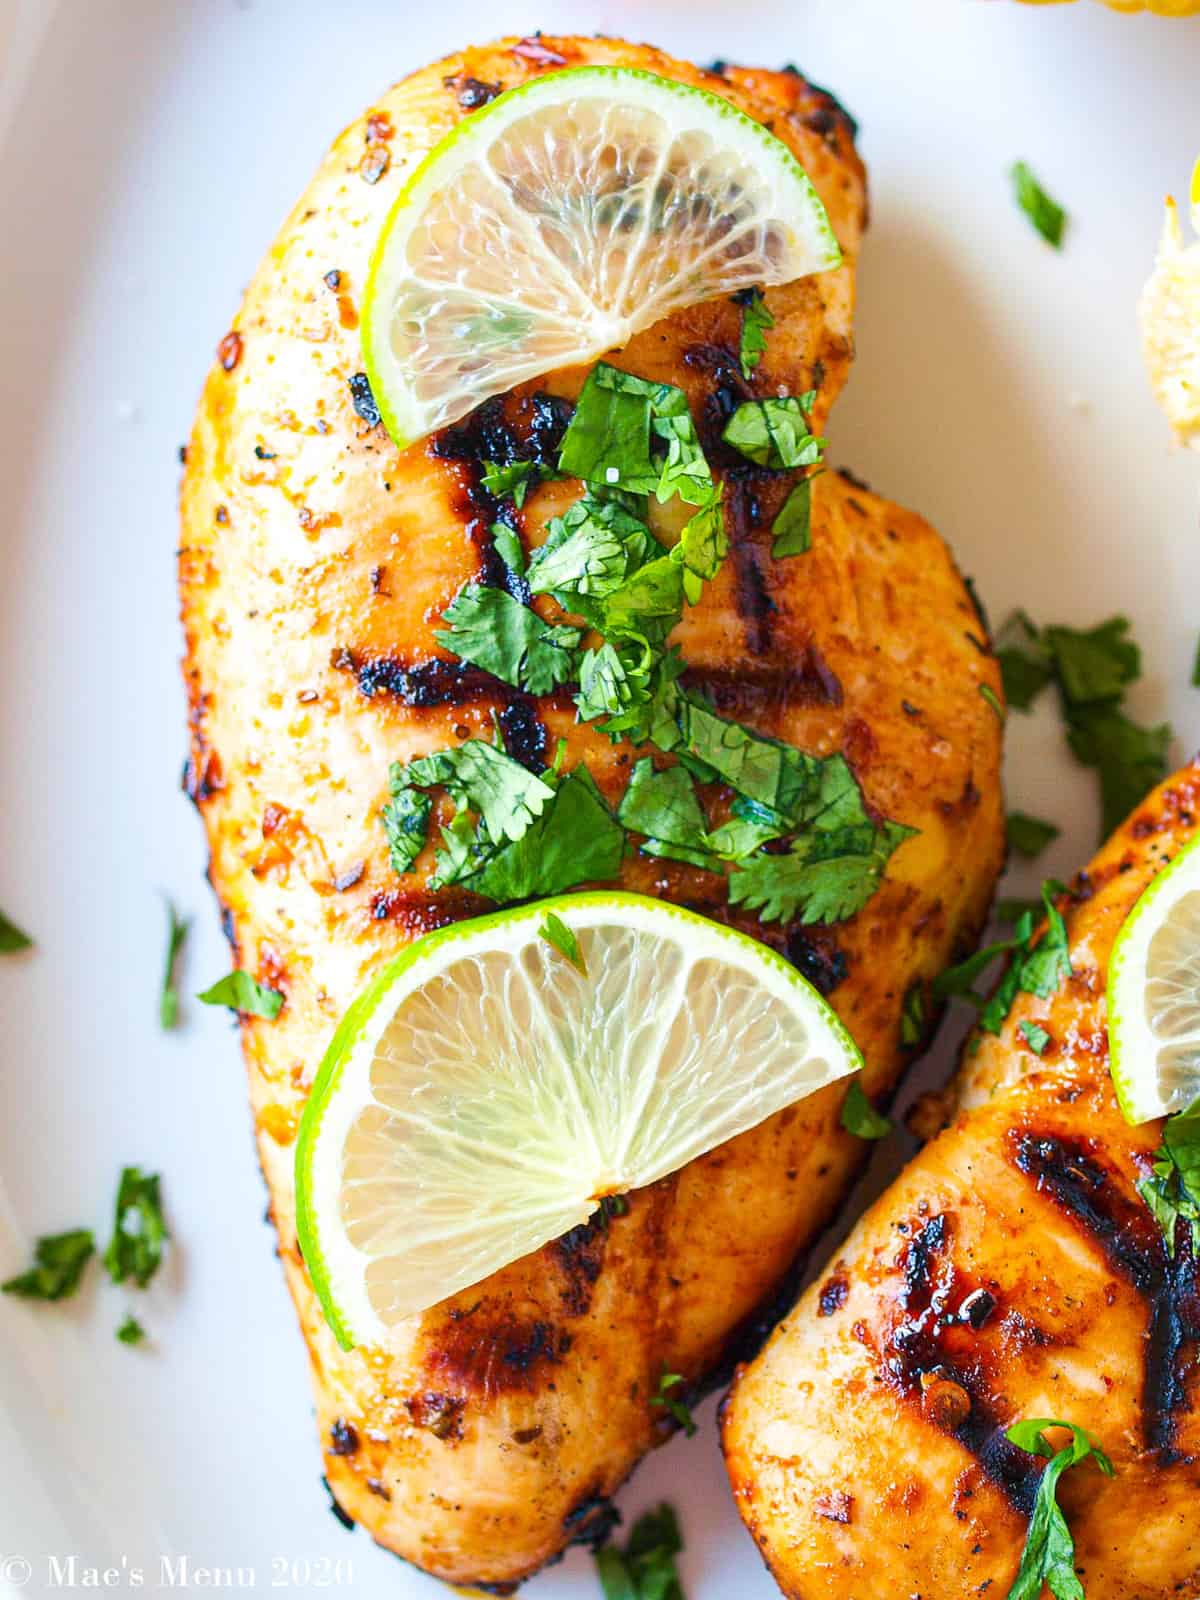 An upclose shot of a grilled chicken breast with chopped cilantro and sliced limes on top. 